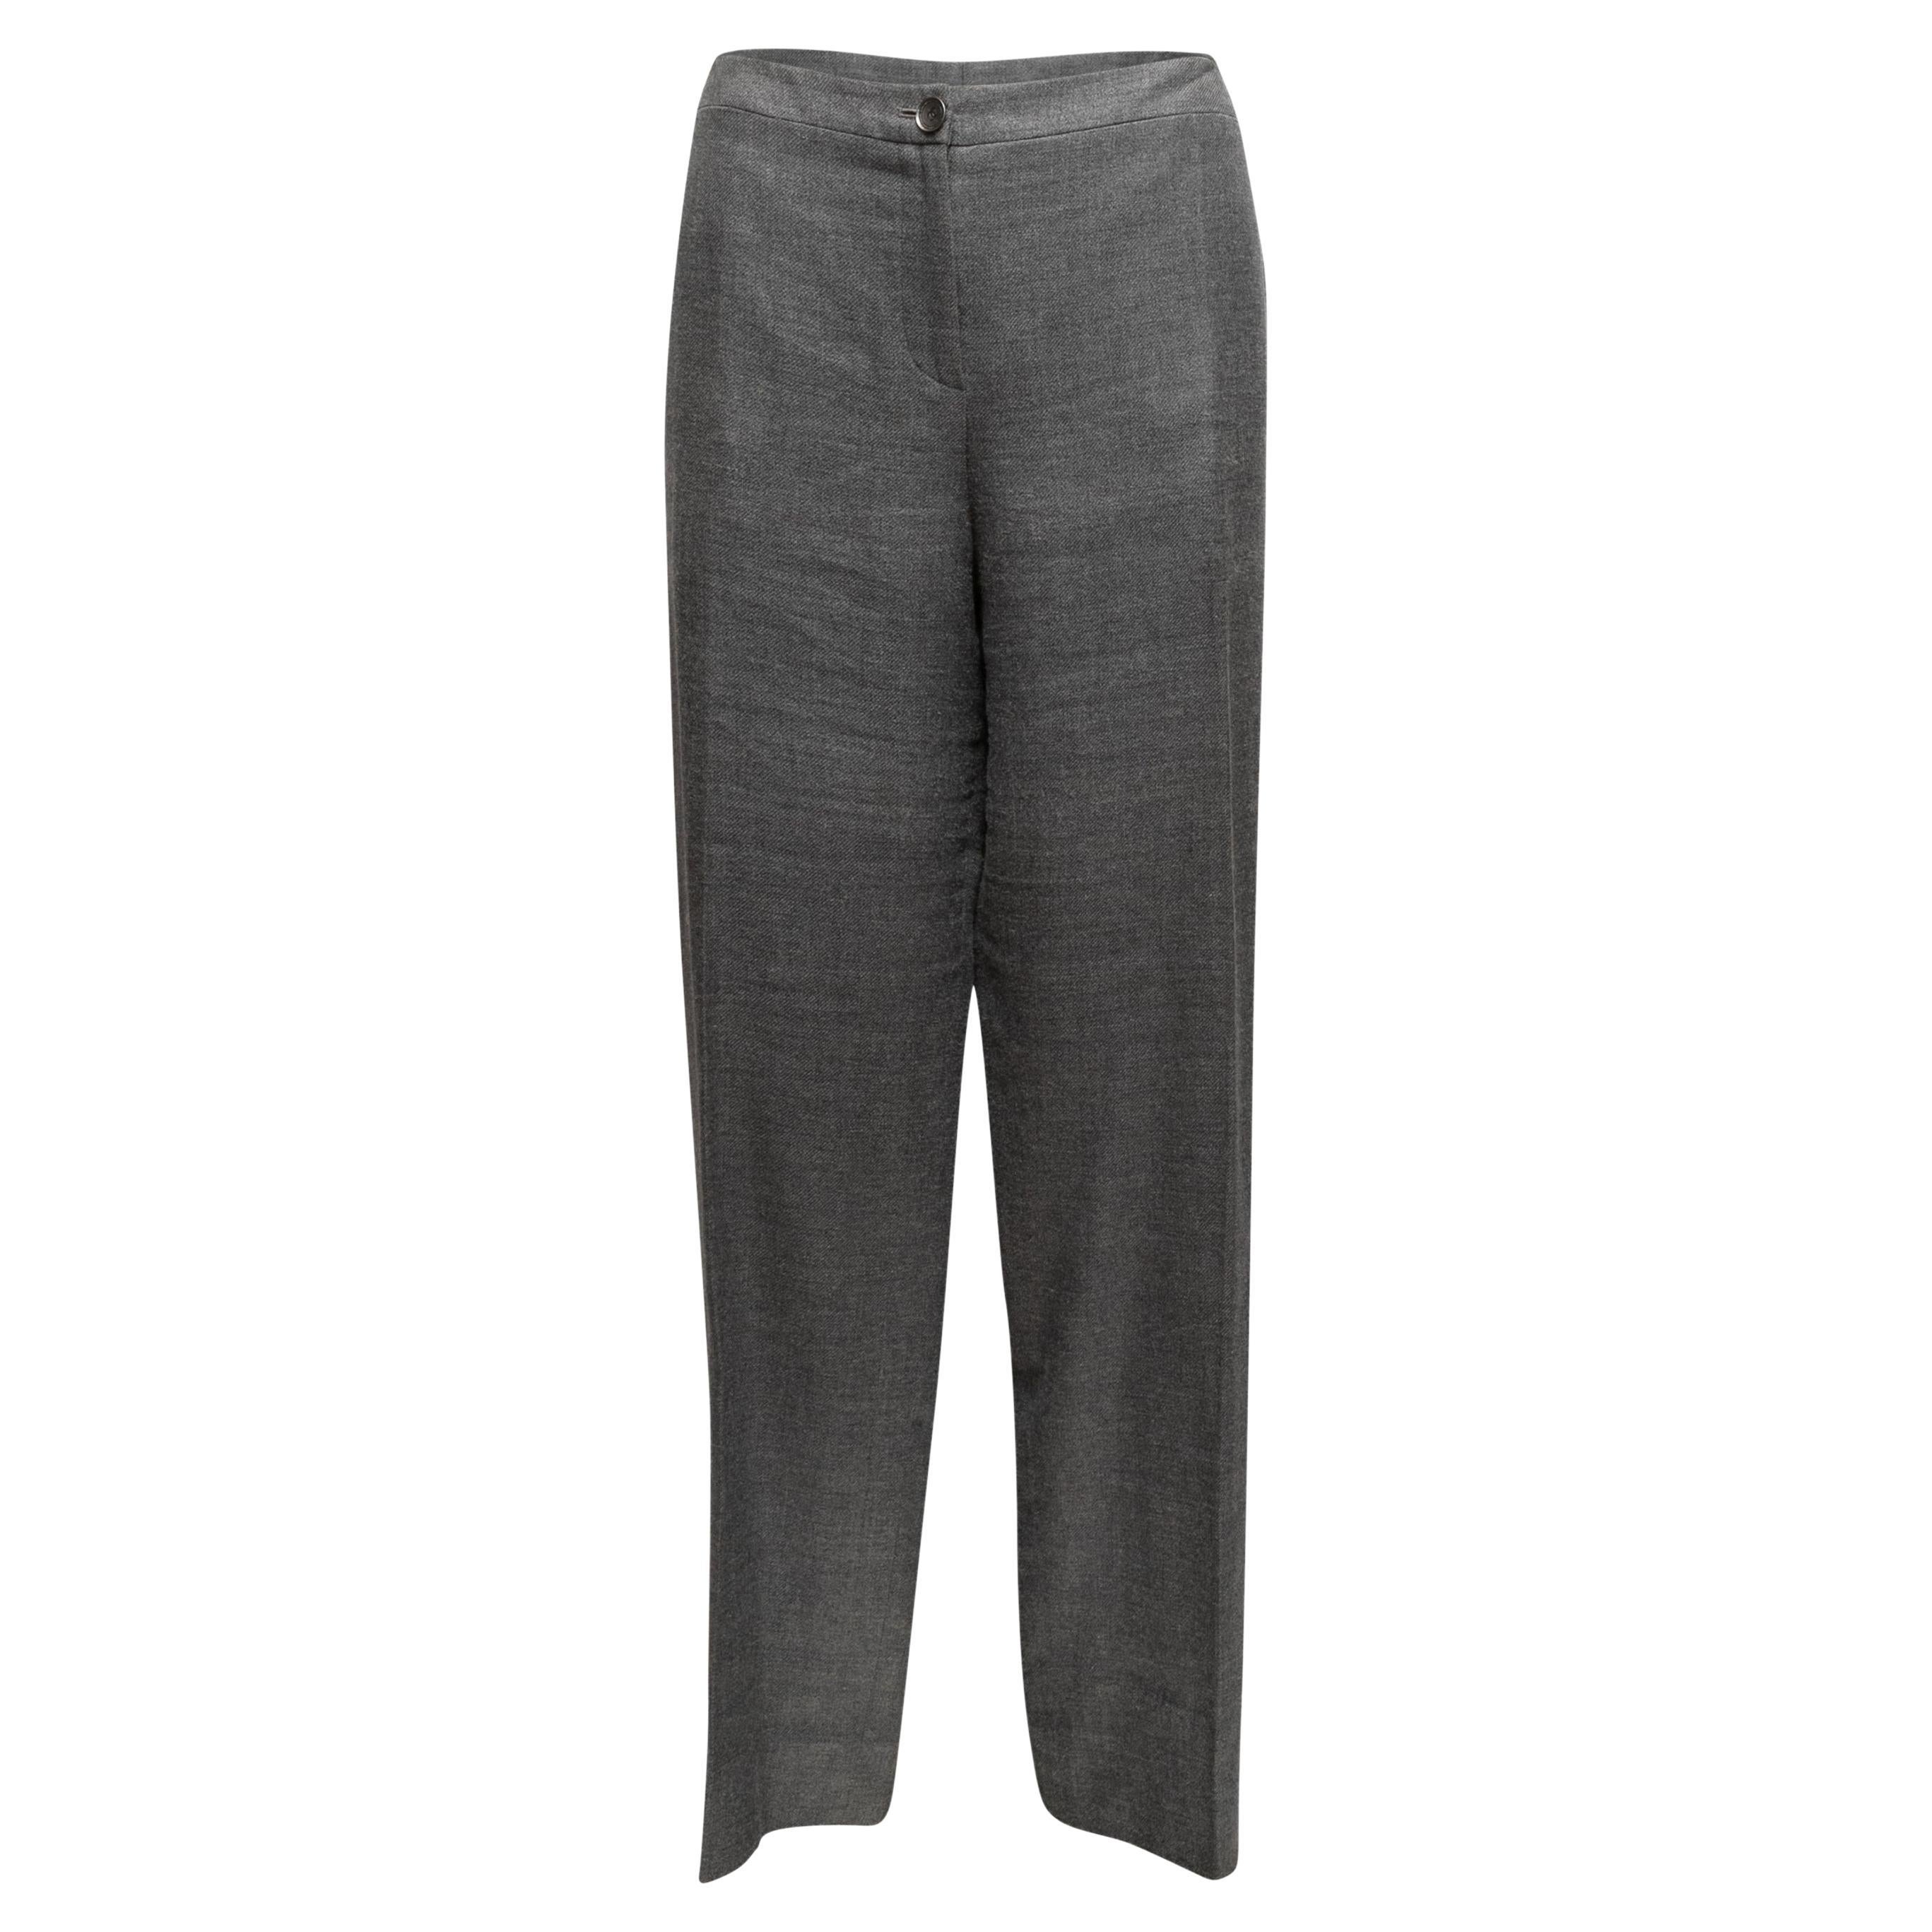 Vintage Grey Chanel Cruise 2005 Linen & Cashmere-Blend Trousers Size FR 48 For Sale